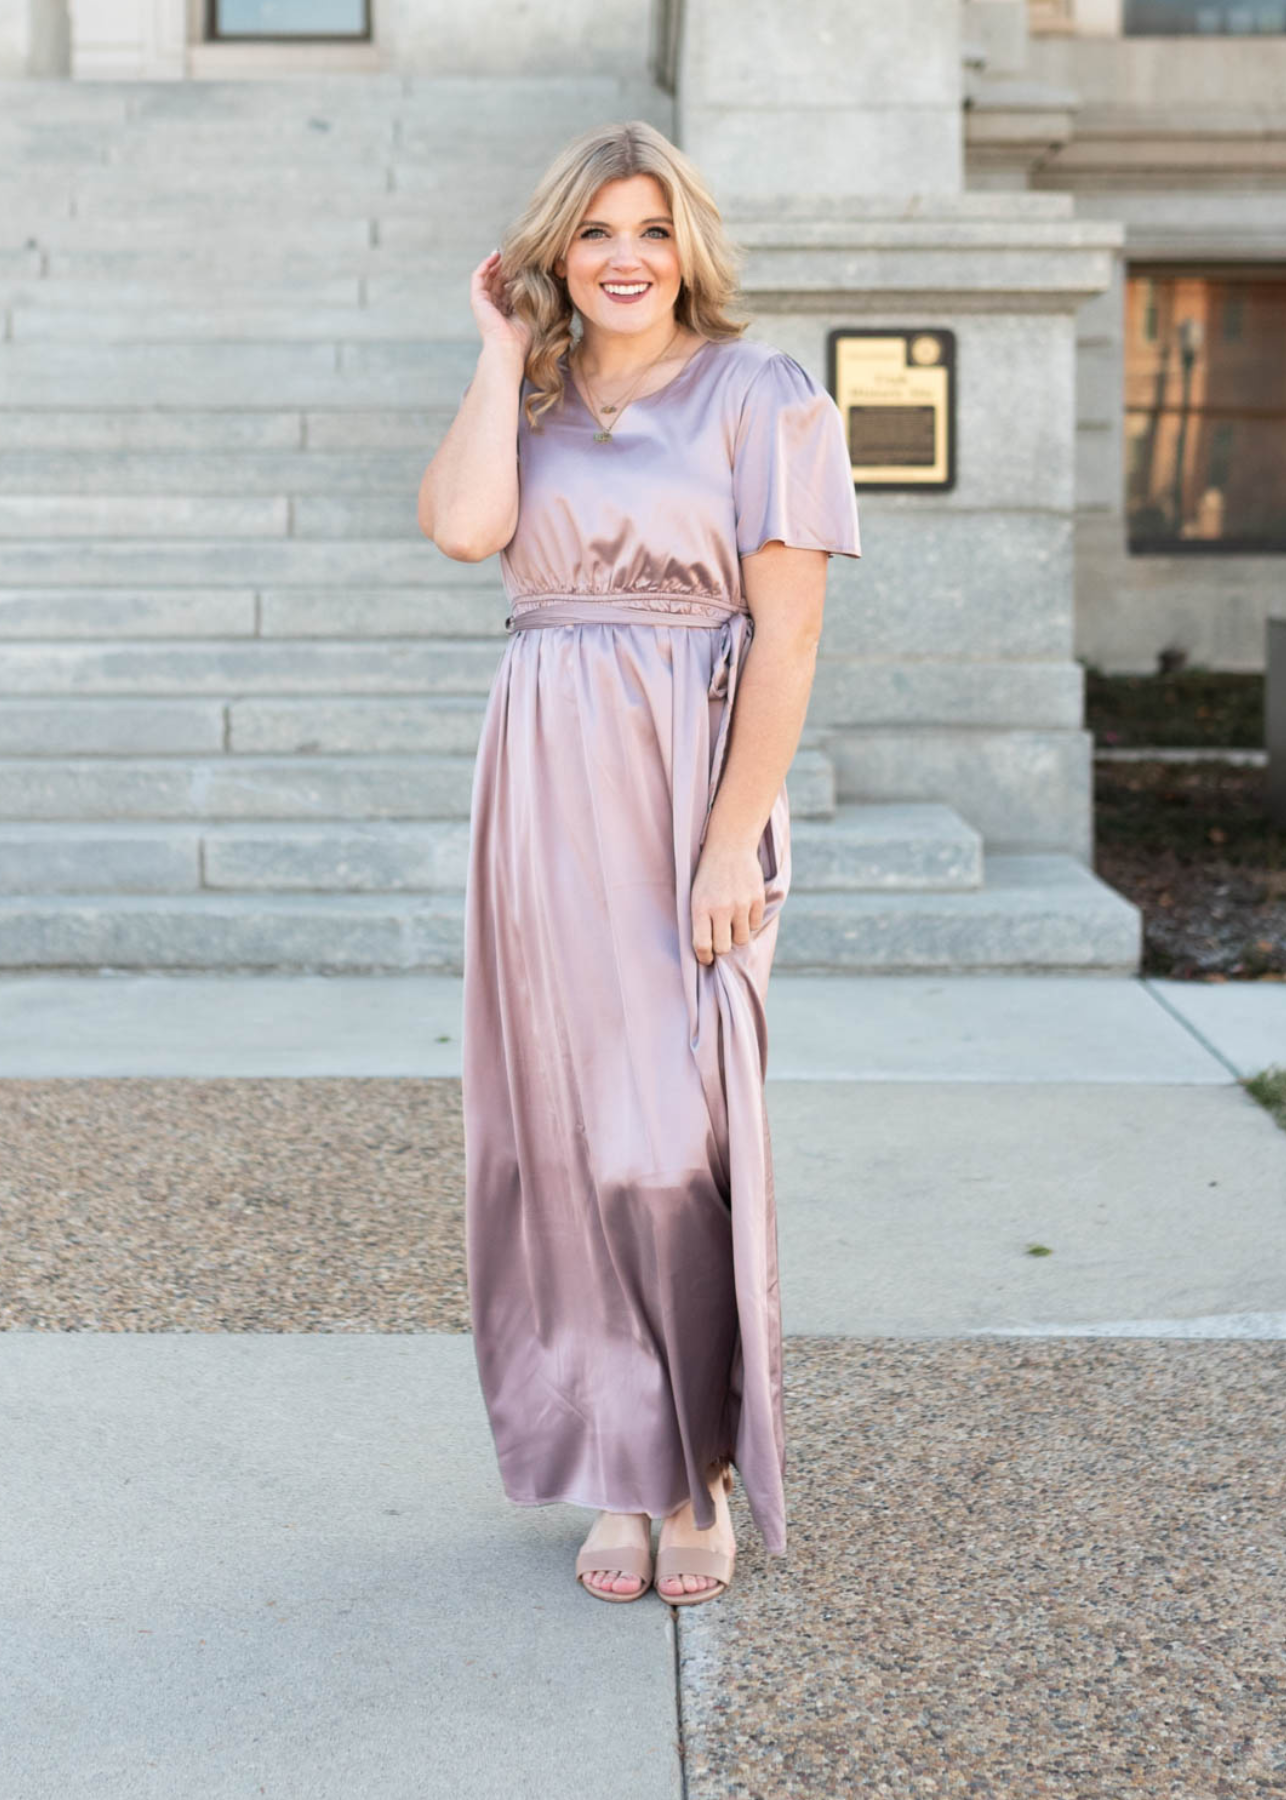 Short sleeve lavender dress with tie at the waist